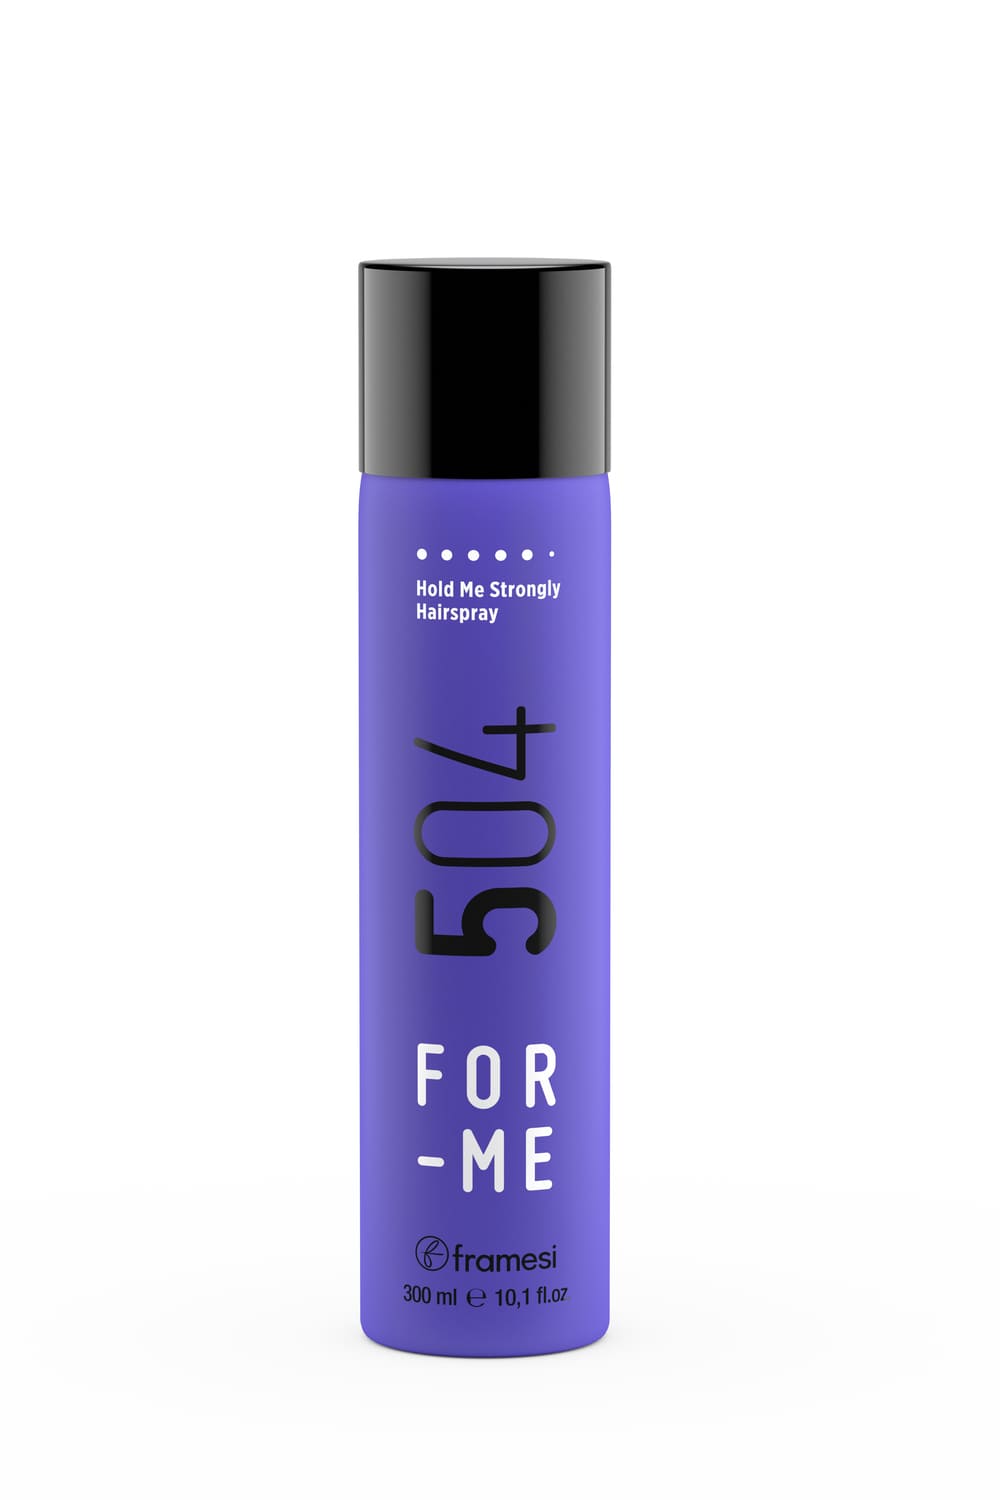 FOR ME_504_HOLD ME STRONGL HAIRSPRAY_300 ML